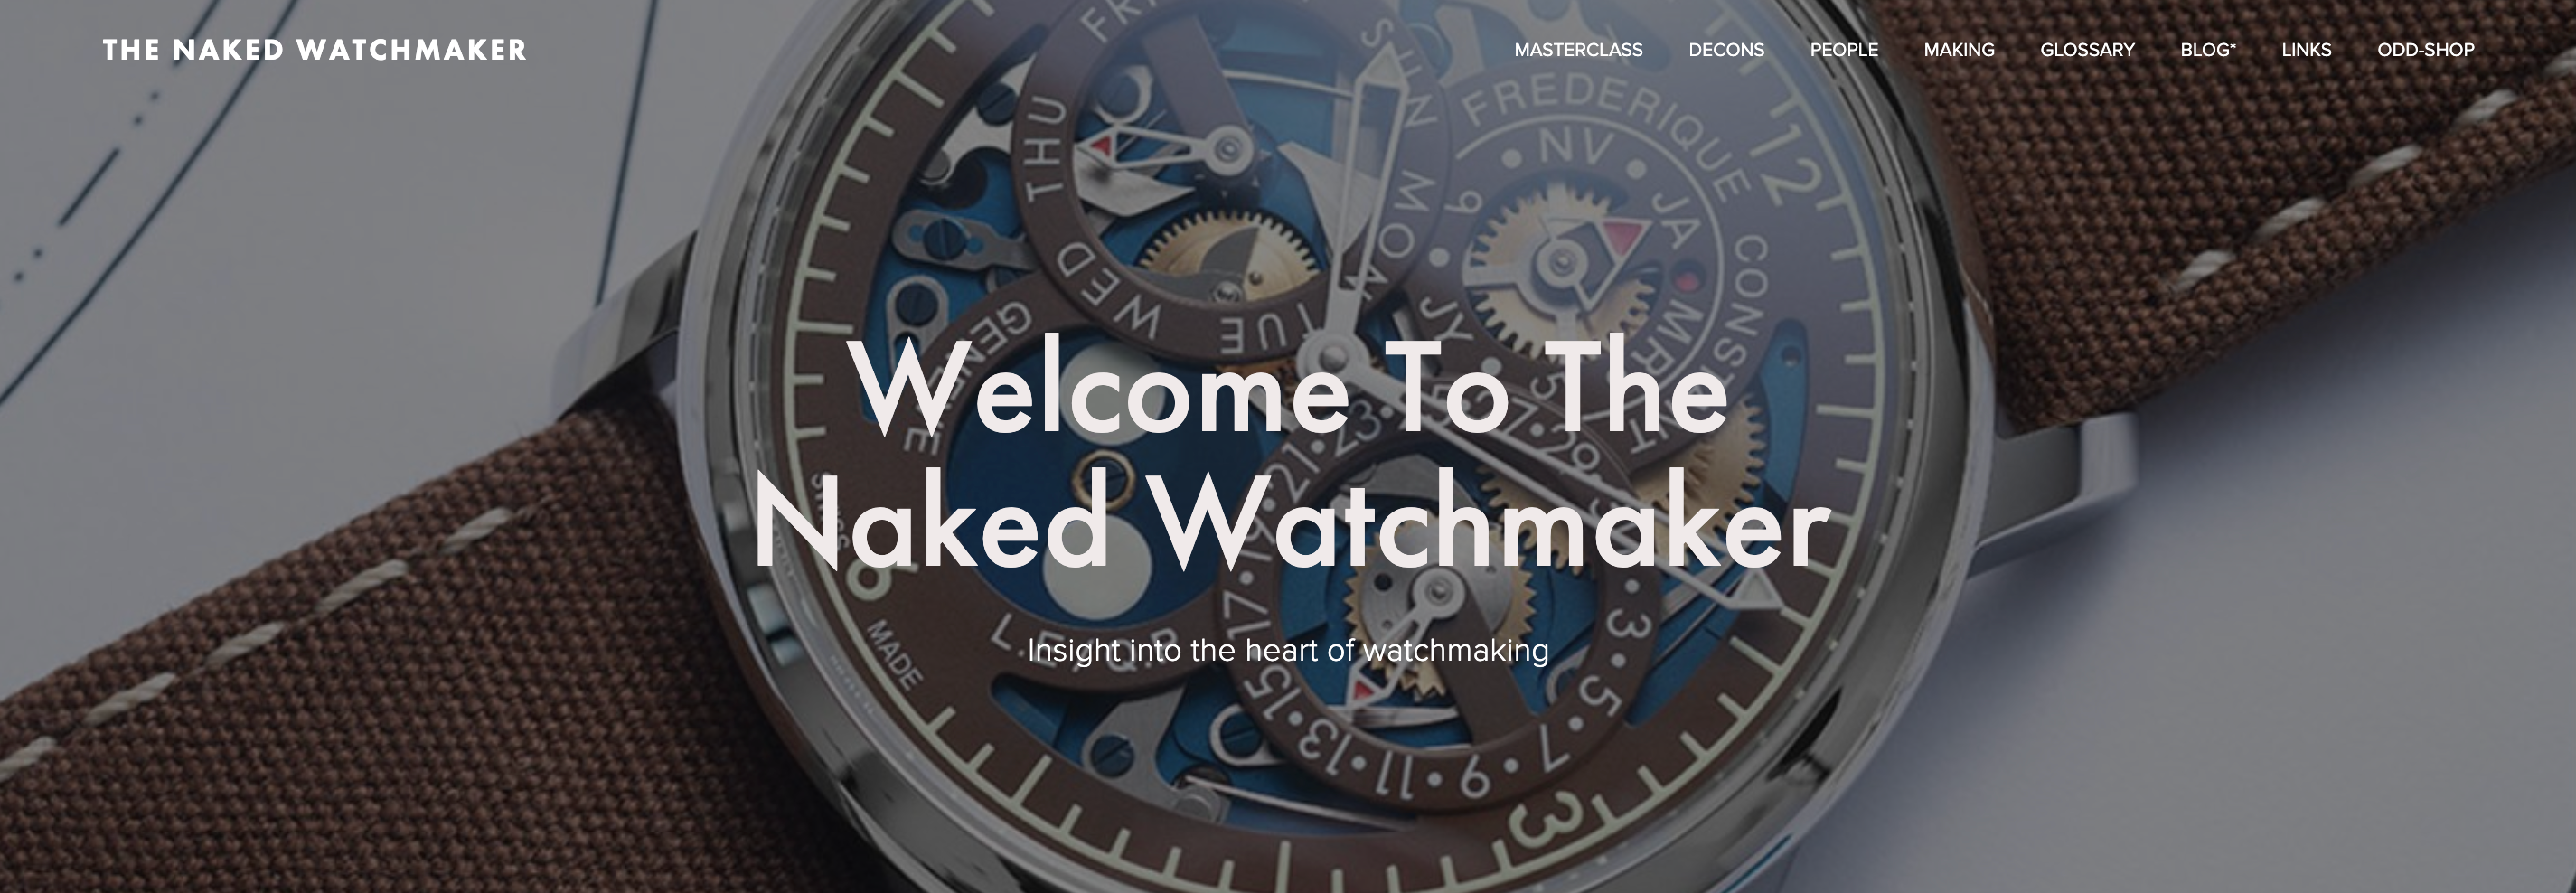 the-naked-watchmaker